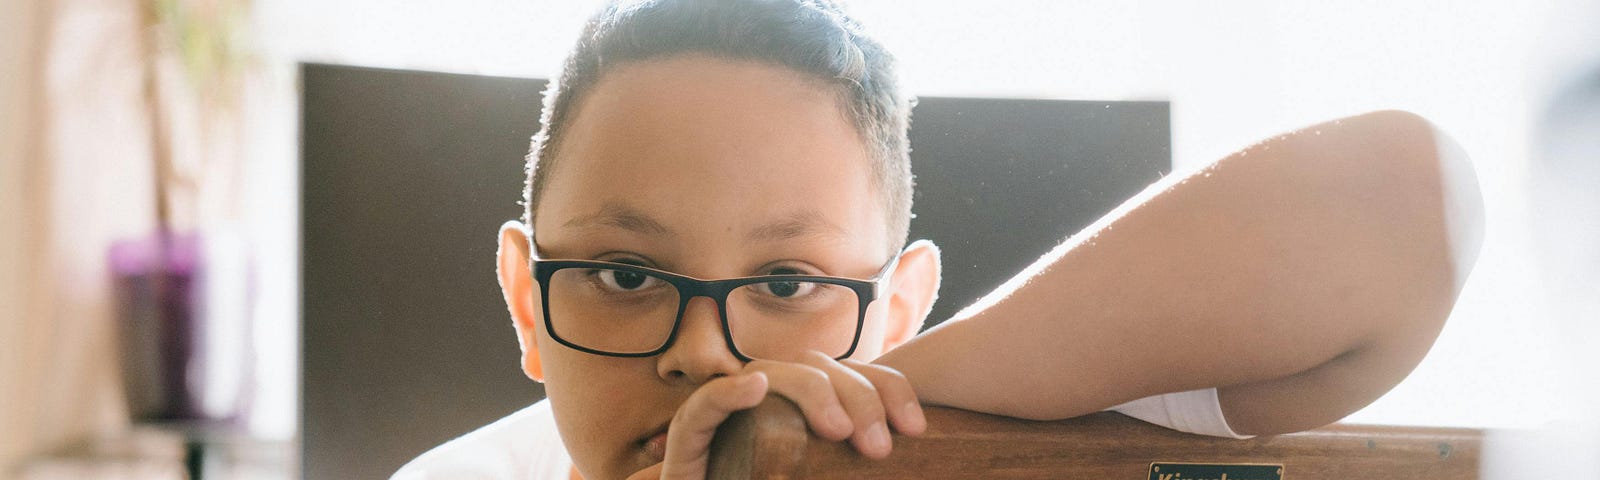 Little boy with glasses looking somber and staring straight into the camera